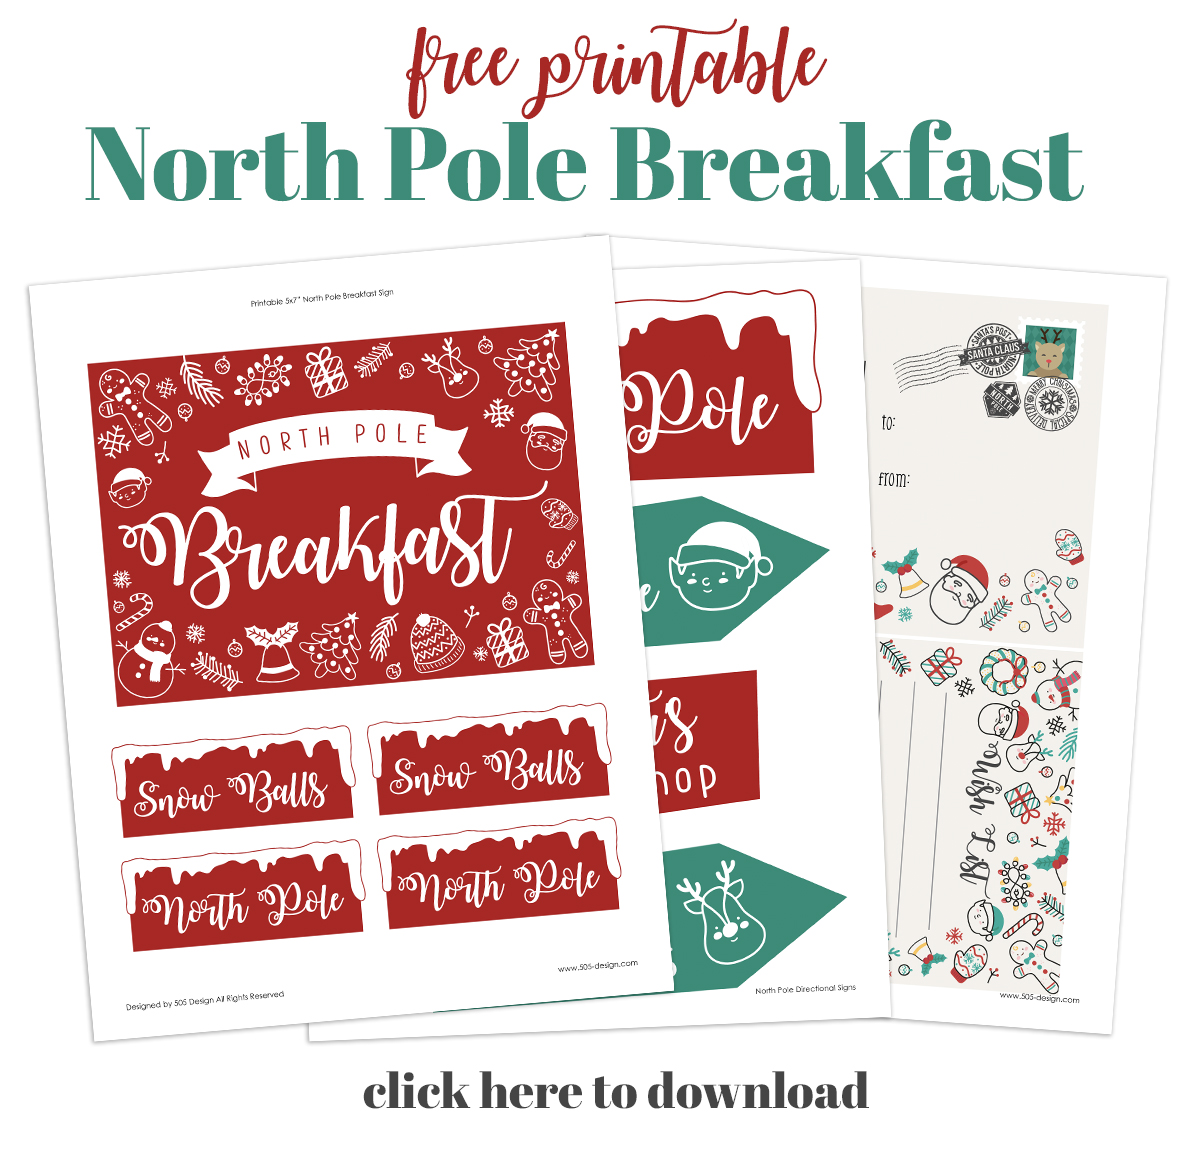 Search Results for “nort pole breakfast” 505 Design, Inc